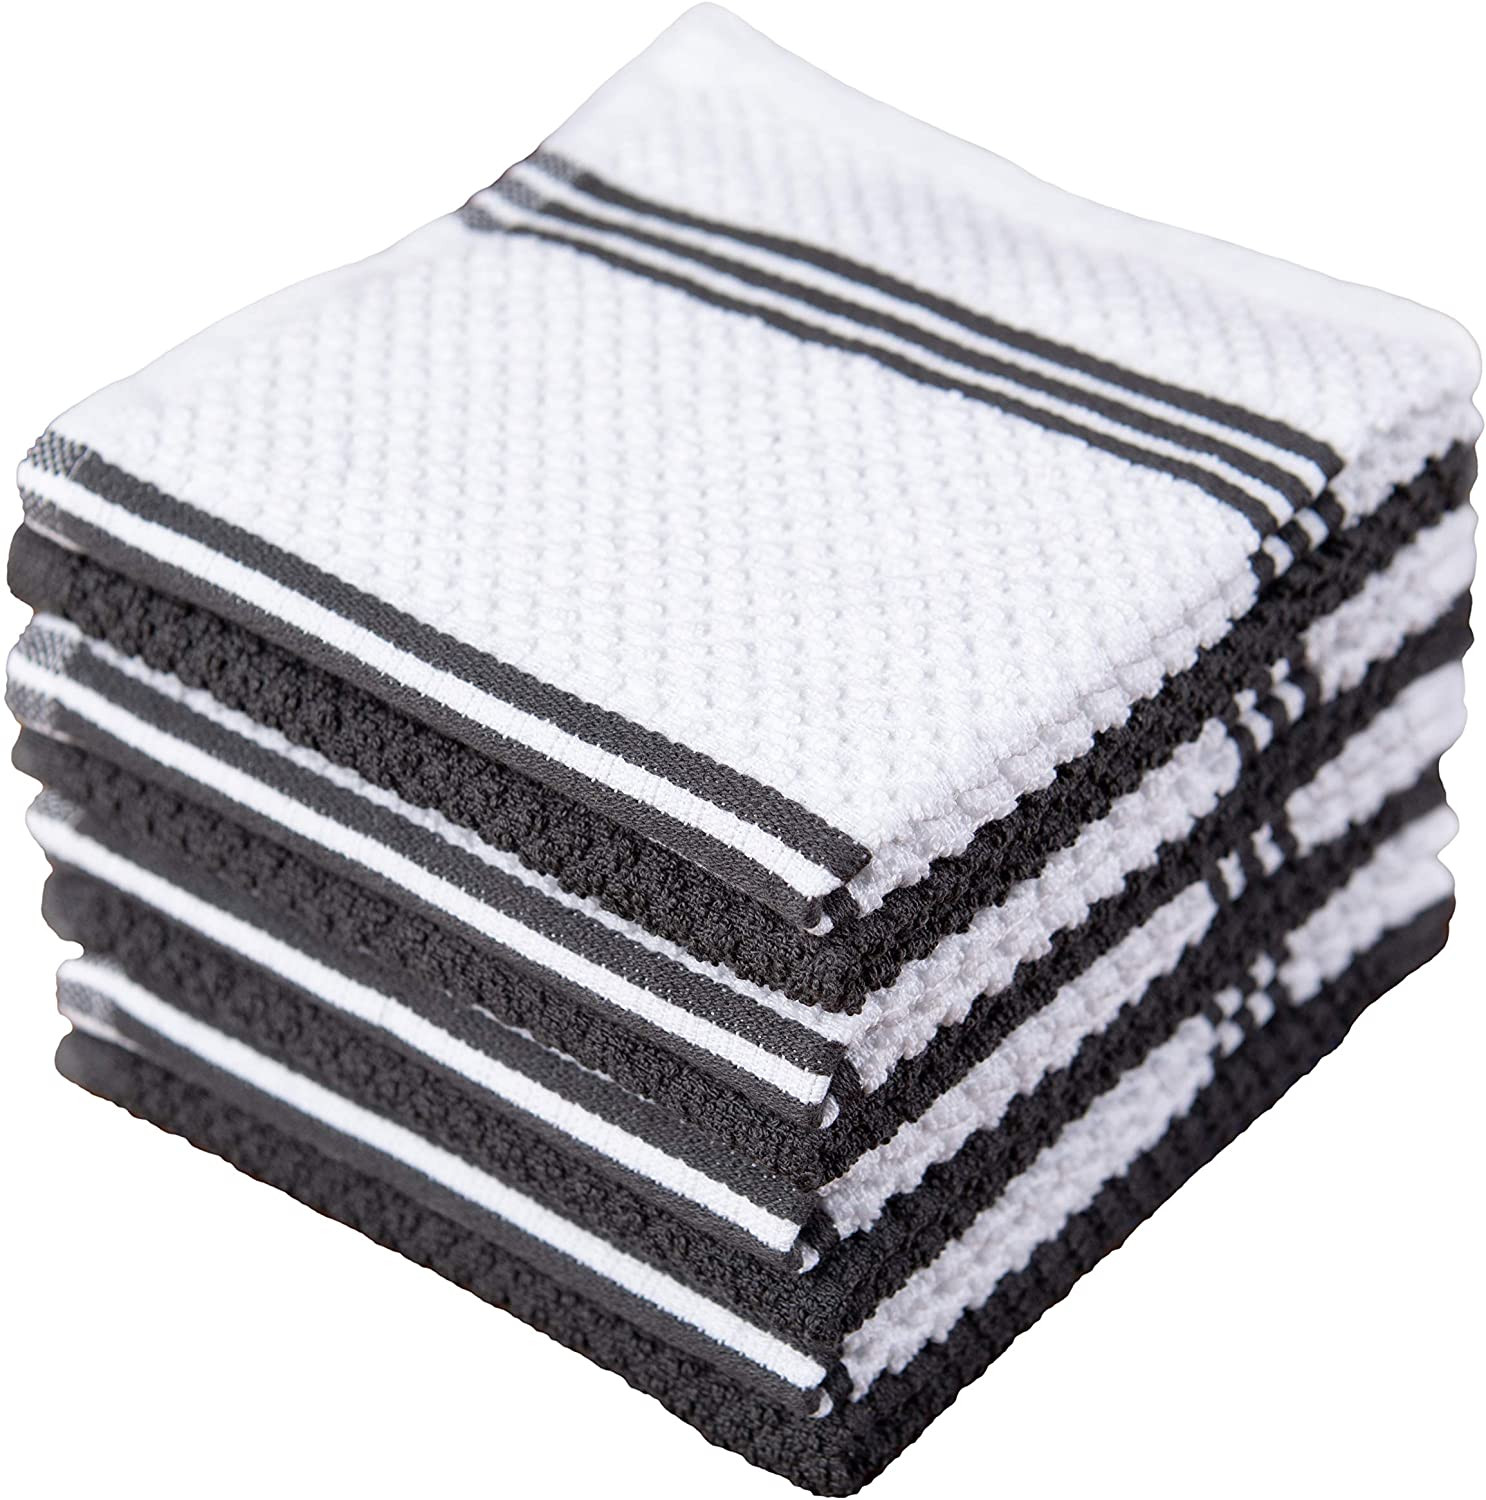 Sticky Toffee Cotton Kitchen Towels Dishcloths Set of 8, Gray and White Tea  Towels, Reusable and Absorbent Cleaning Cloths, Oeko-Tex Cotton, 12 in x